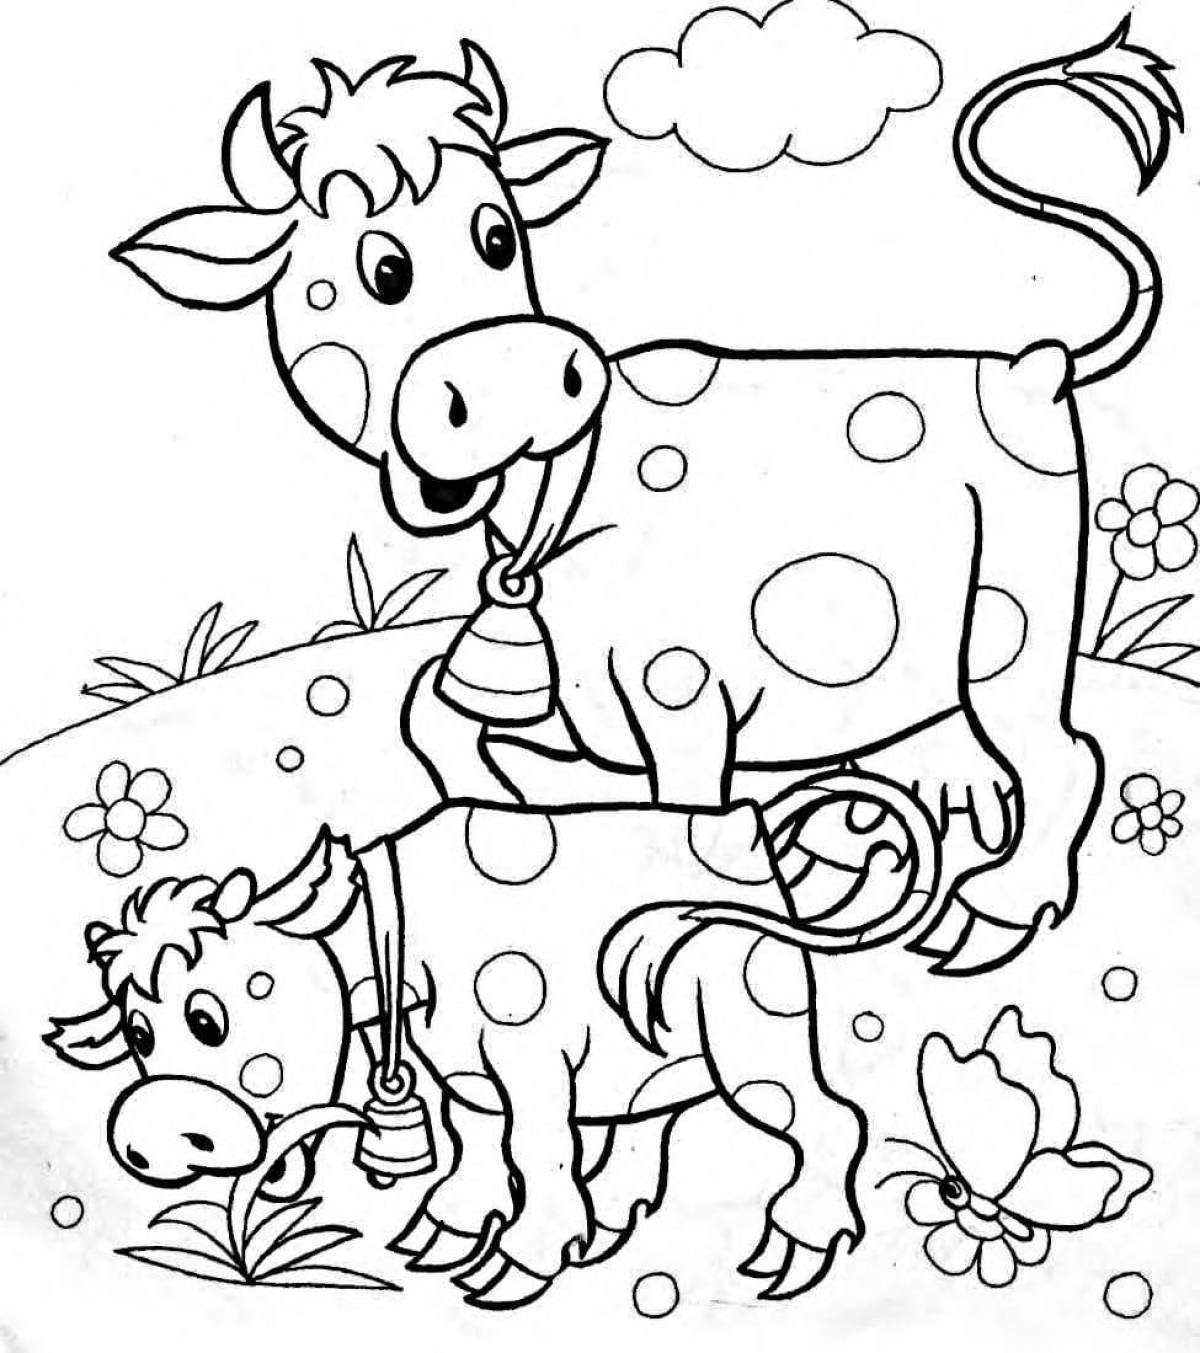 Outstanding cow coloring page for 3-4 year olds